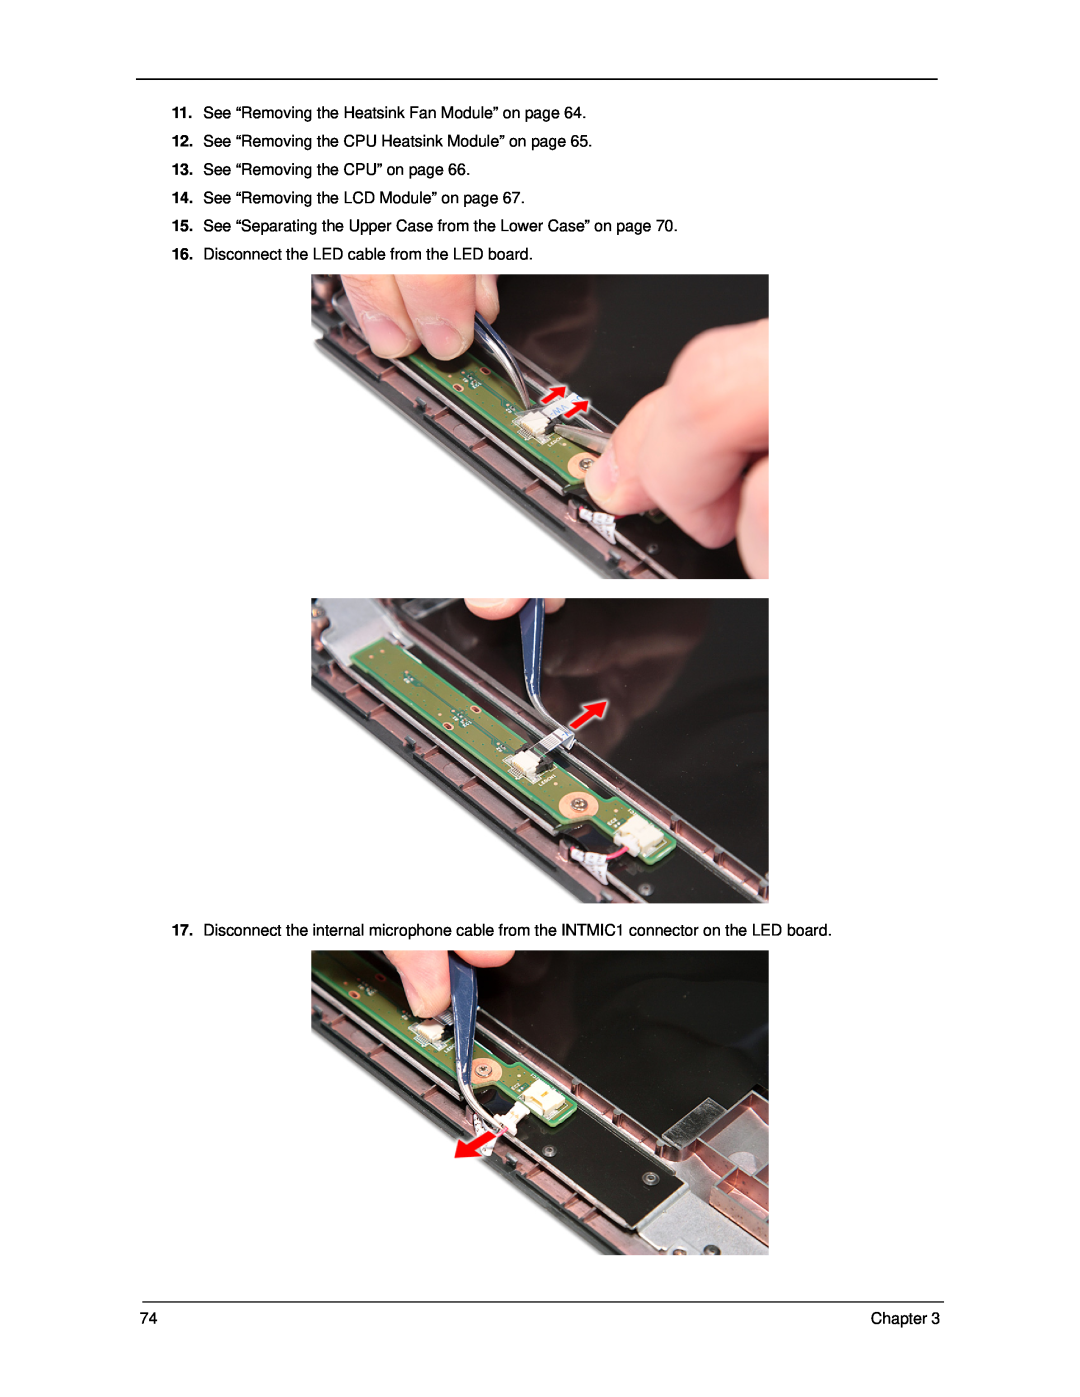 Acer 5330 manual See “Removing the Heatsink Fan Module” on page, See “Removing the CPU Heatsink Module” on page, Chapter 